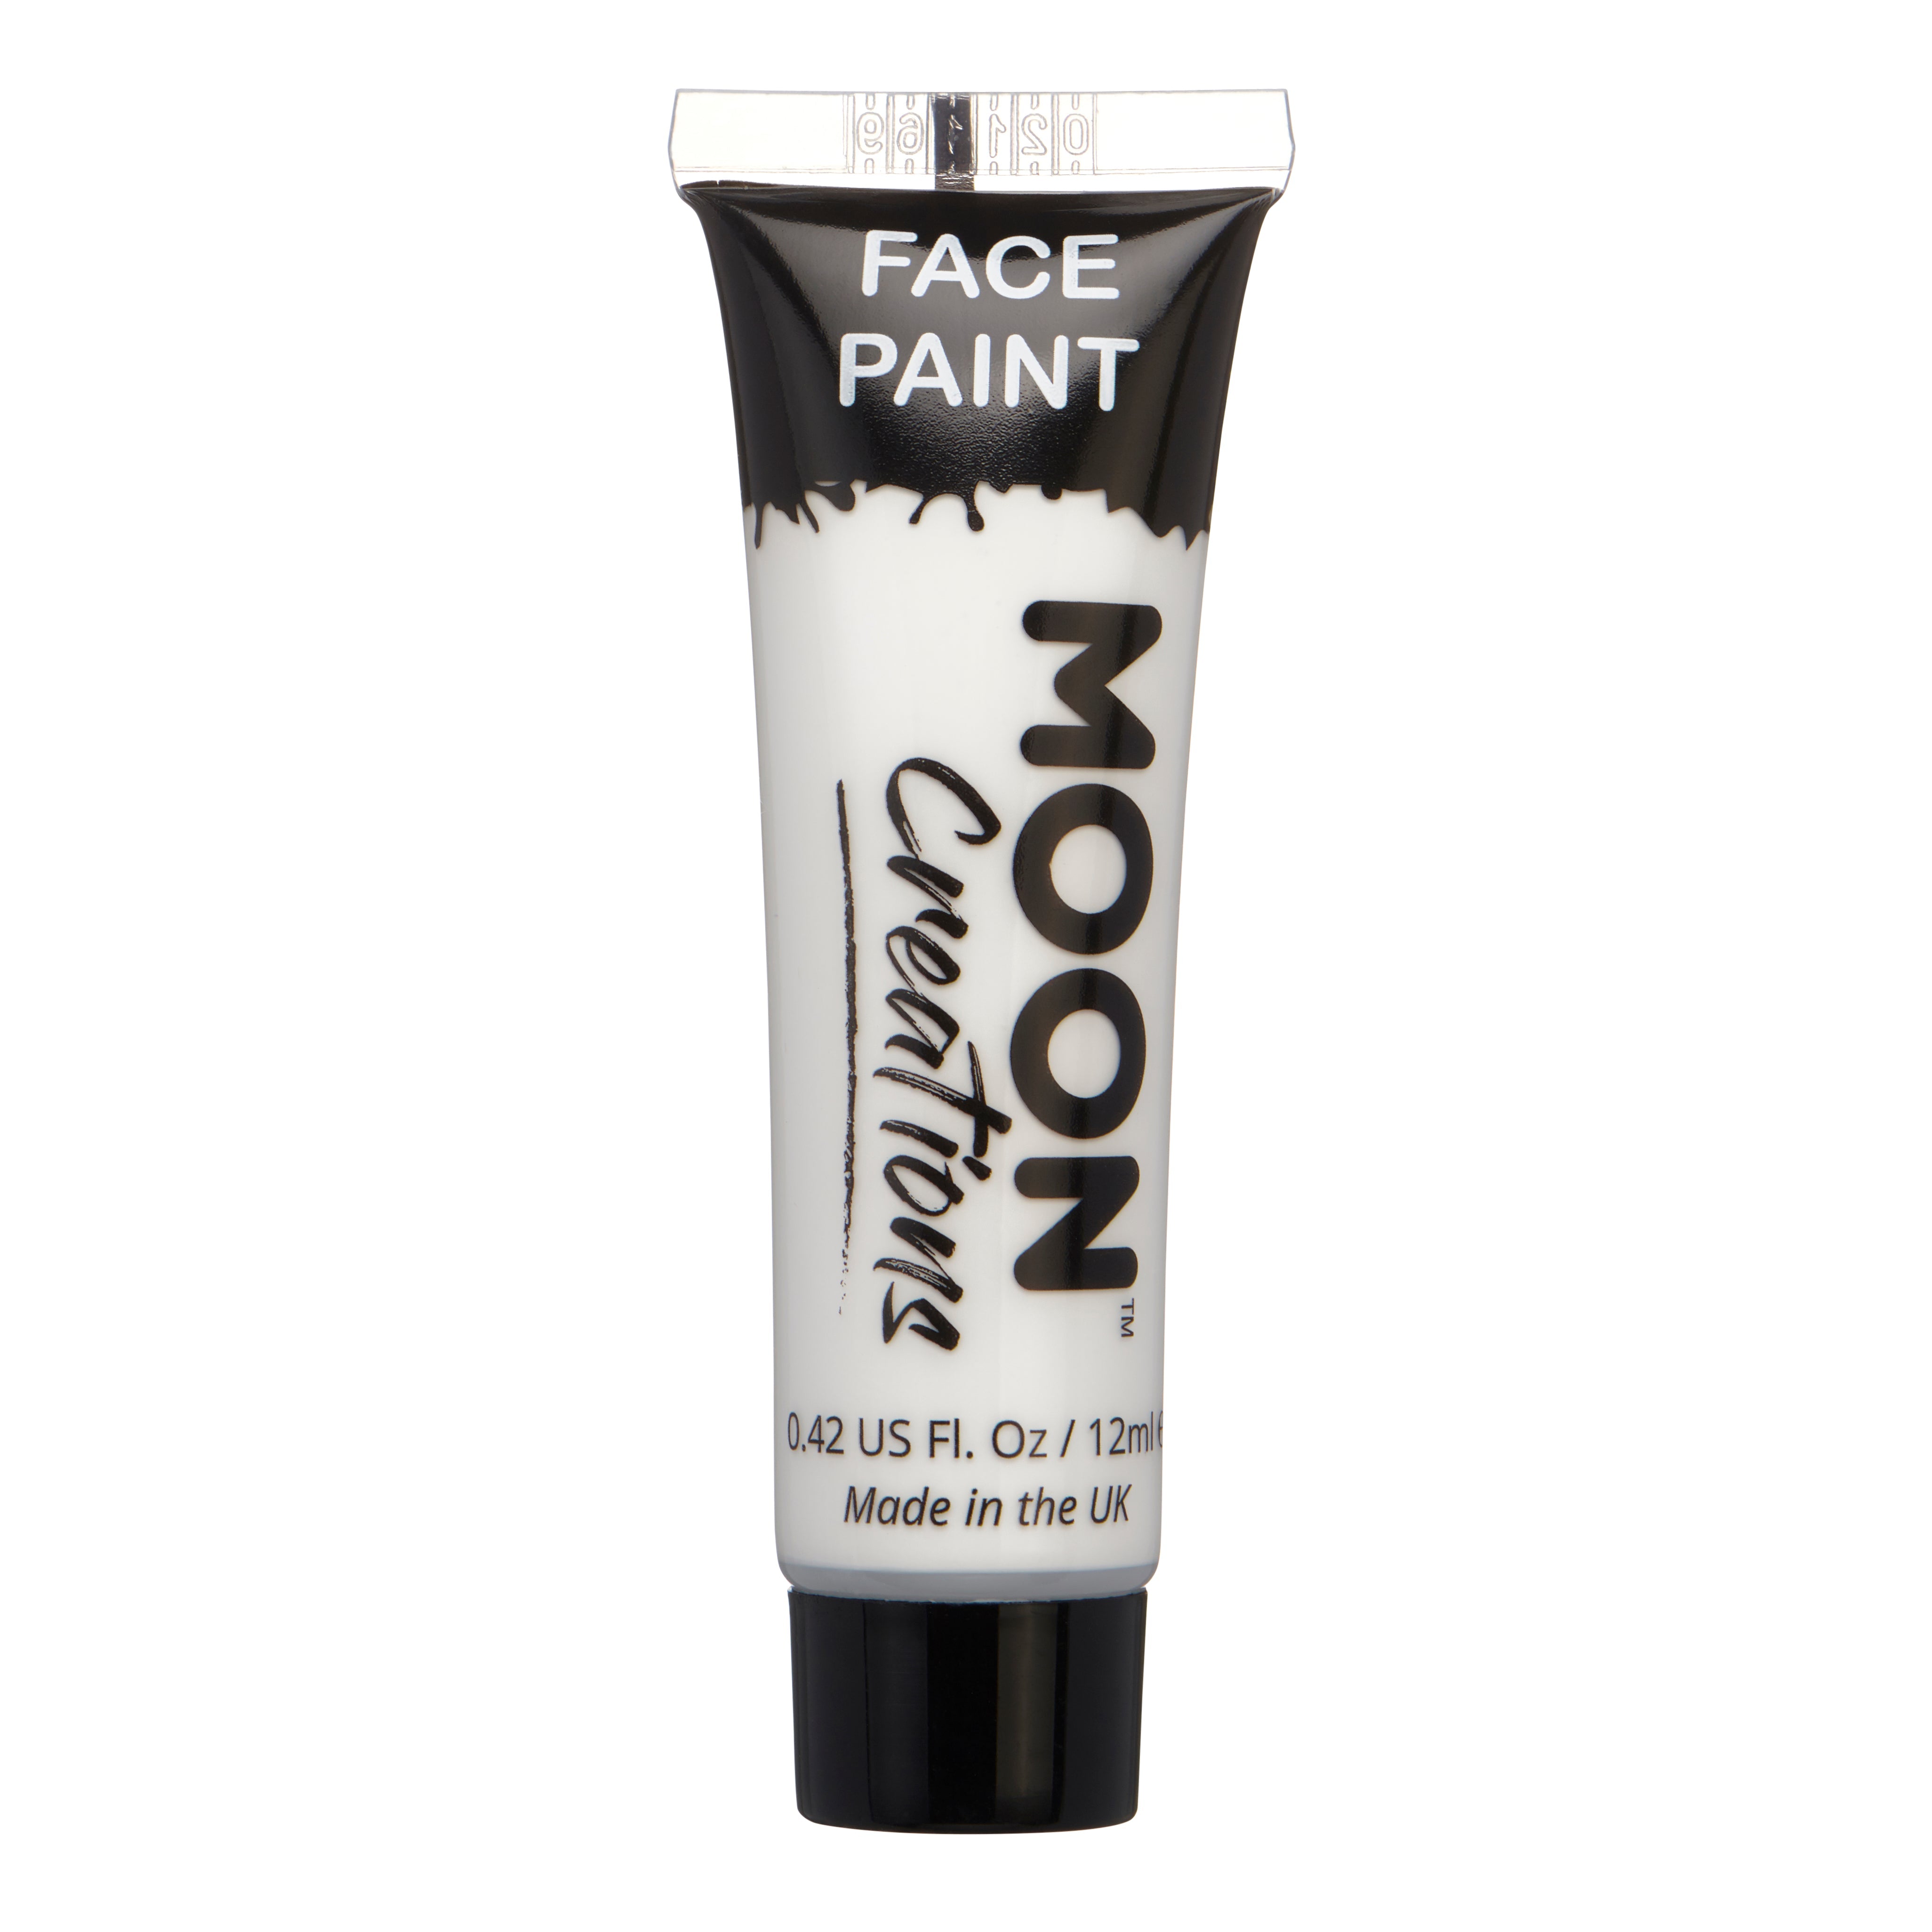 White - Face & Body Paint Makeup, 12mL. Cosmetically certified, FDA & Health Canada compliant, cruelty free and vegan.